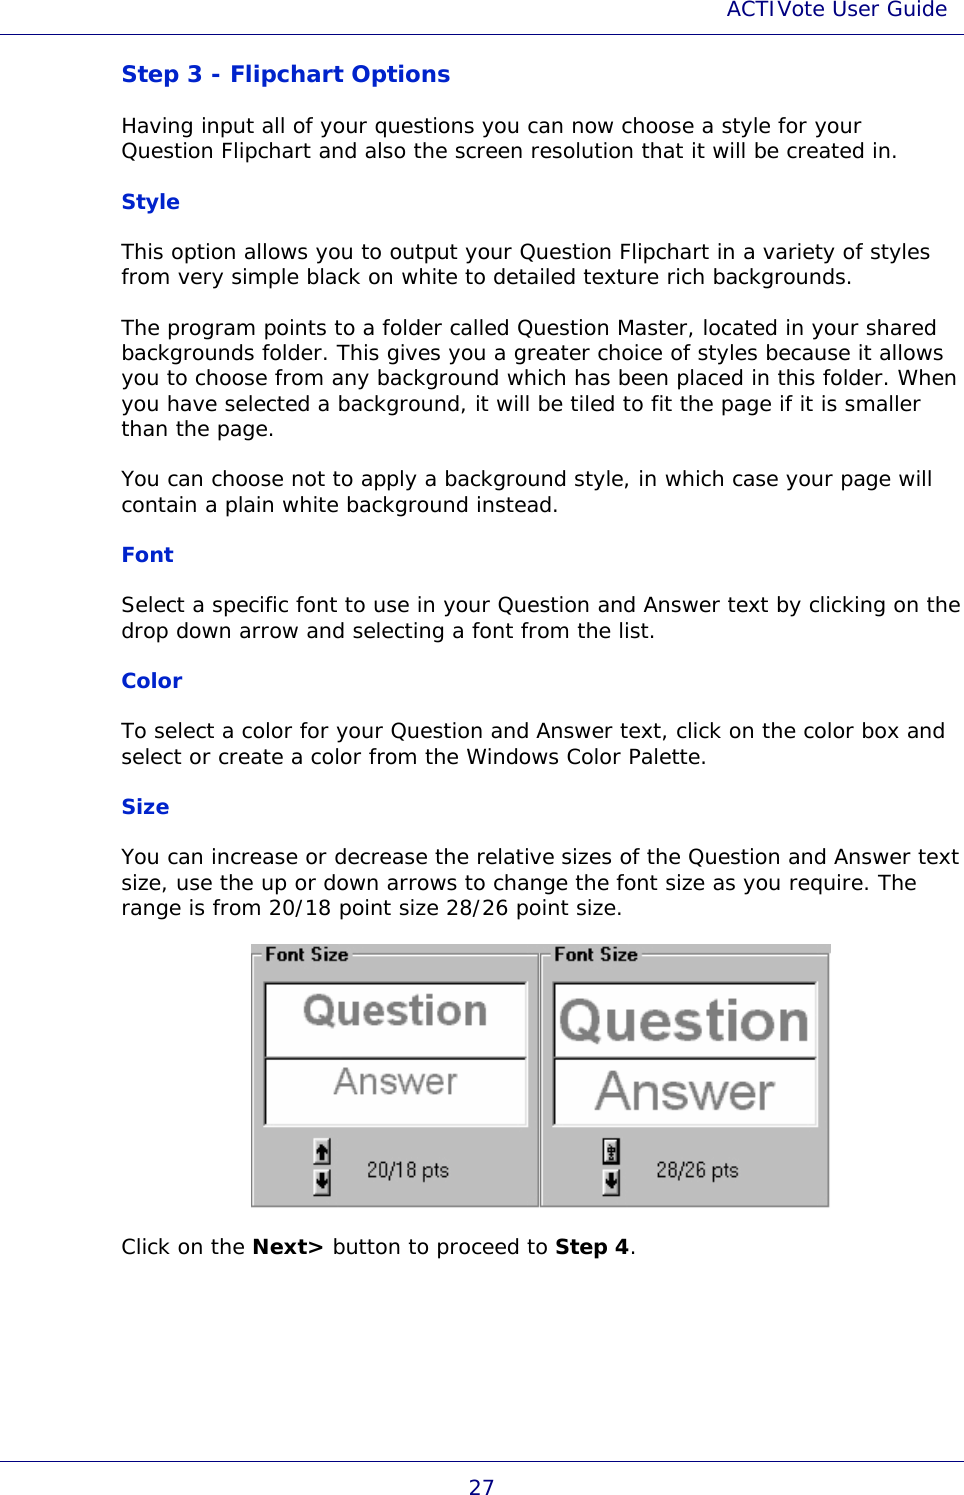 ACTIVote User Guide 27 Step 3 - Flipchart Options Having input all of your questions you can now choose a style for your Question Flipchart and also the screen resolution that it will be created in. Style This option allows you to output your Question Flipchart in a variety of styles from very simple black on white to detailed texture rich backgrounds. The program points to a folder called Question Master, located in your shared backgrounds folder. This gives you a greater choice of styles because it allows you to choose from any background which has been placed in this folder. When you have selected a background, it will be tiled to fit the page if it is smaller than the page.  You can choose not to apply a background style, in which case your page will contain a plain white background instead. Font Select a specific font to use in your Question and Answer text by clicking on the drop down arrow and selecting a font from the list. Color To select a color for your Question and Answer text, click on the color box and select or create a color from the Windows Color Palette. Size You can increase or decrease the relative sizes of the Question and Answer text size, use the up or down arrows to change the font size as you require. The range is from 20/18 point size 28/26 point size.  Click on the Next&gt; button to proceed to Step 4. 